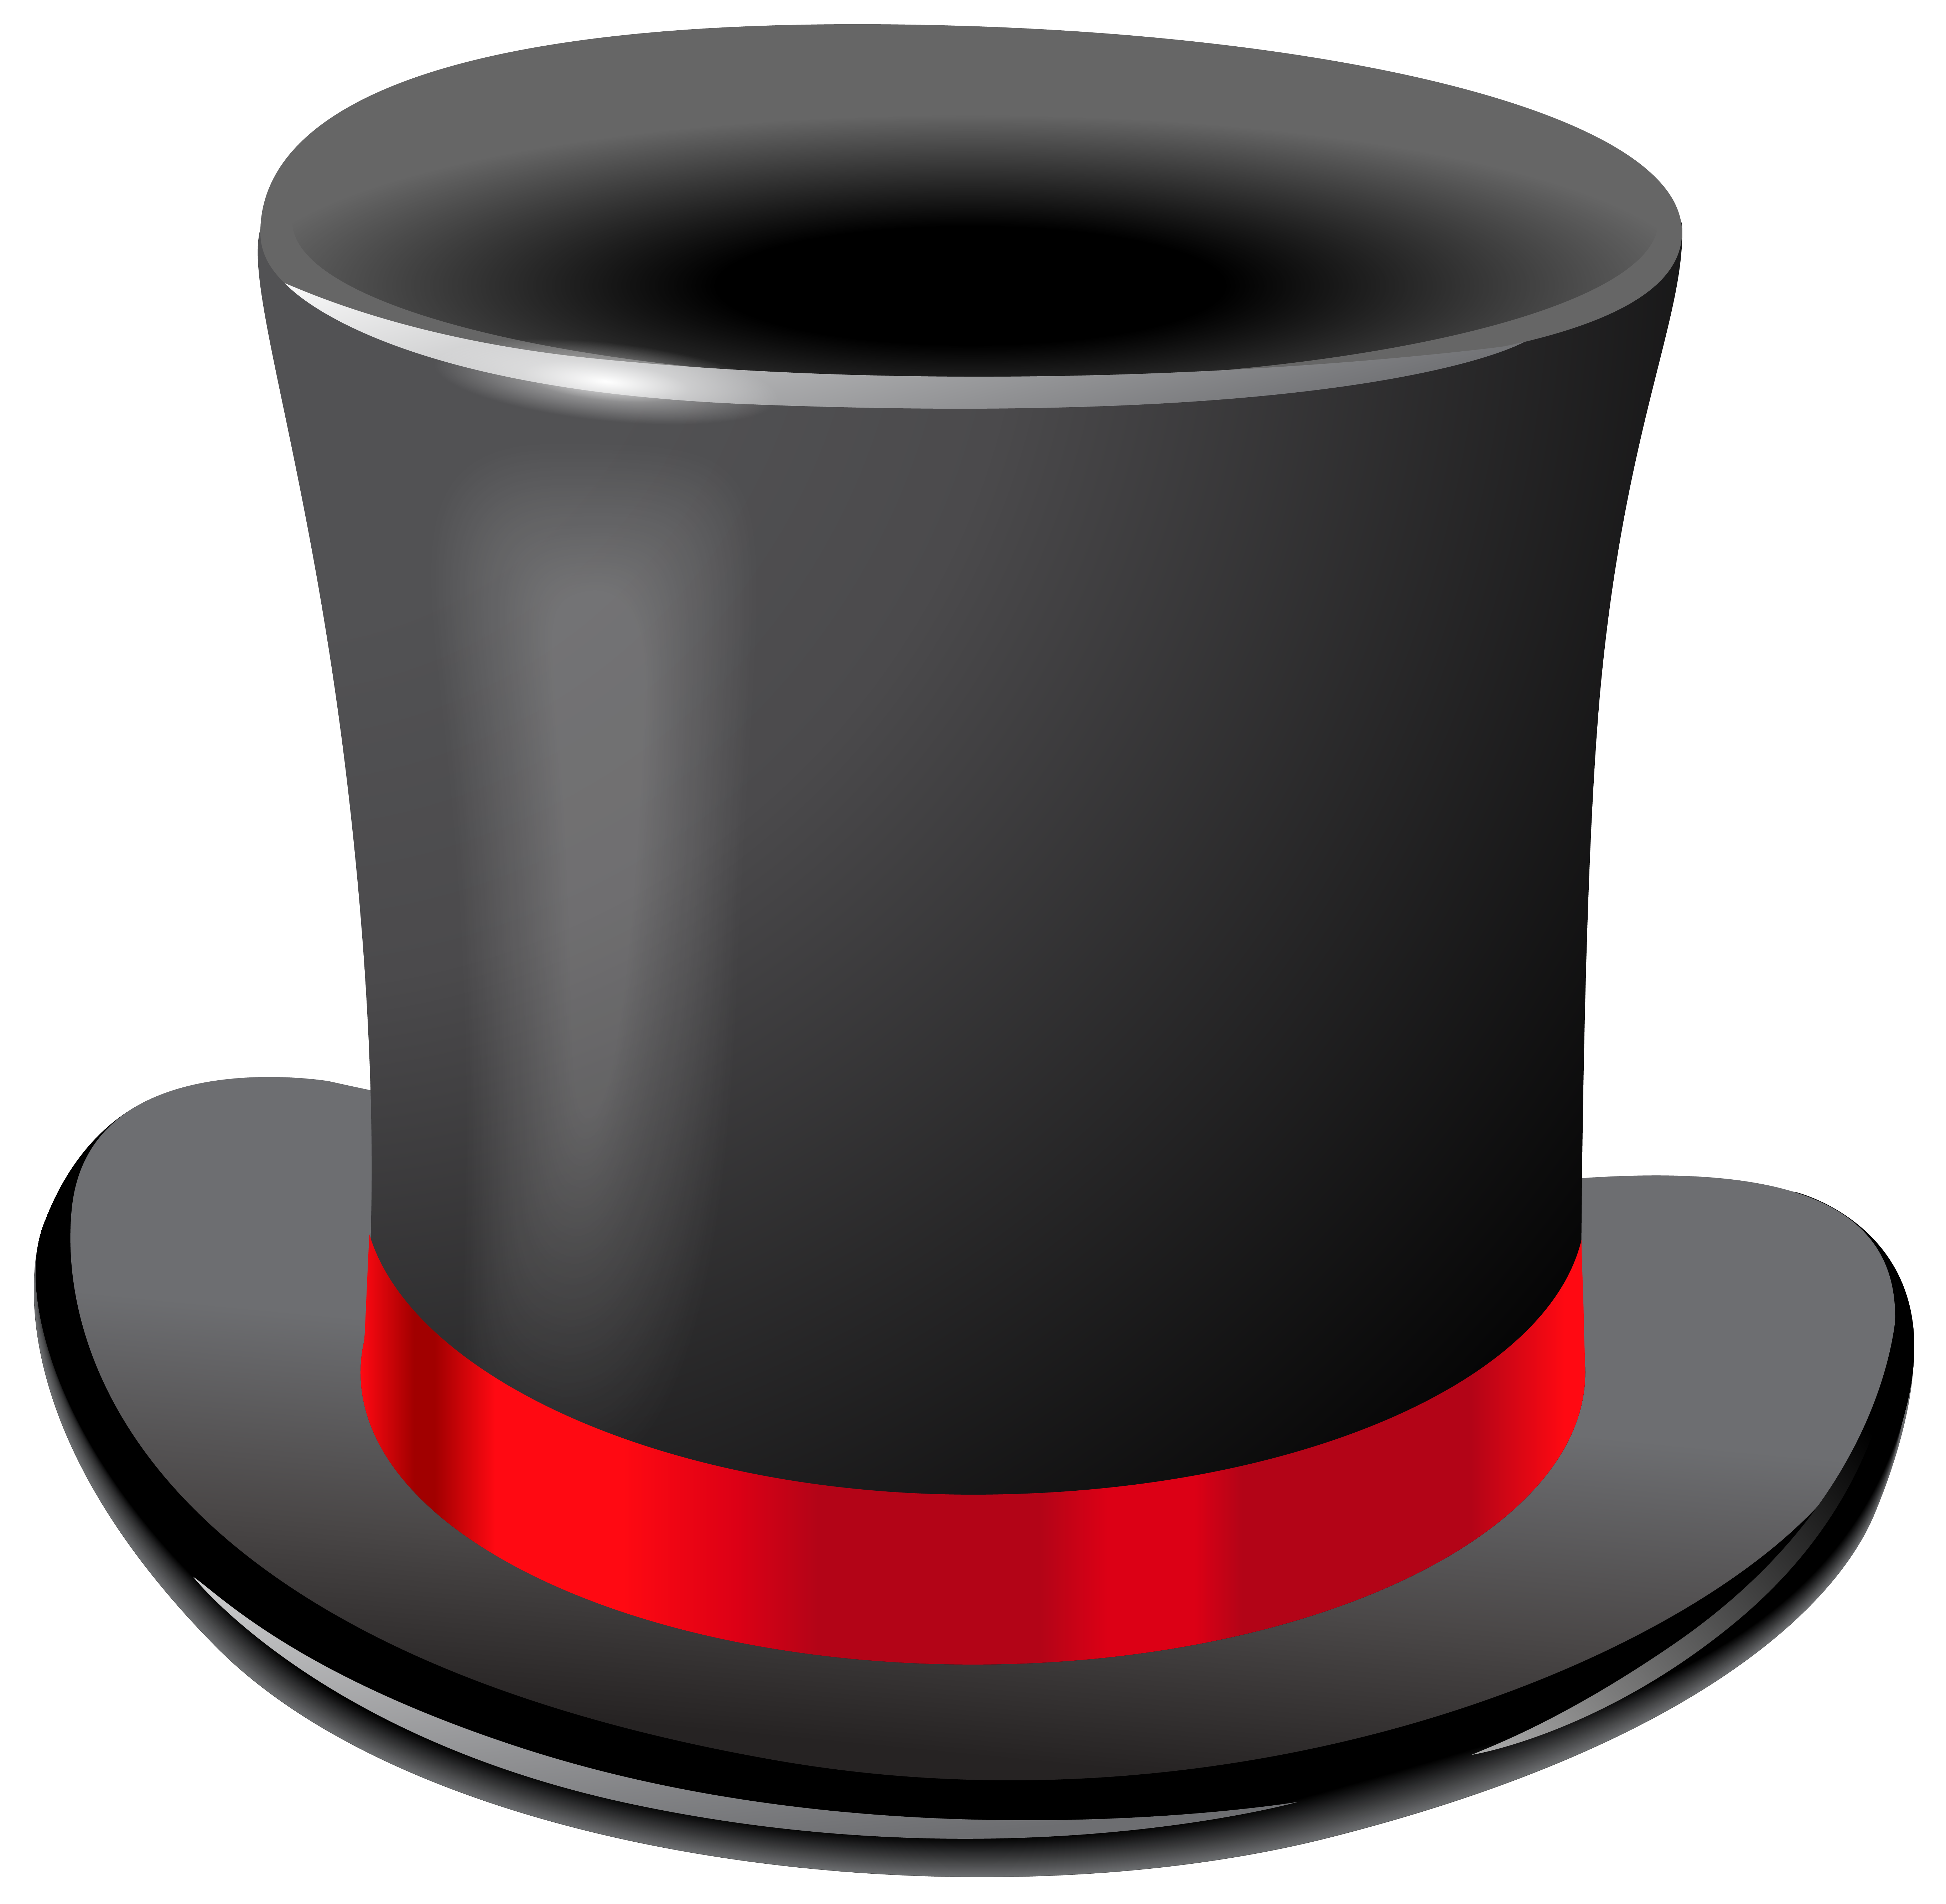 top hat clipart no background